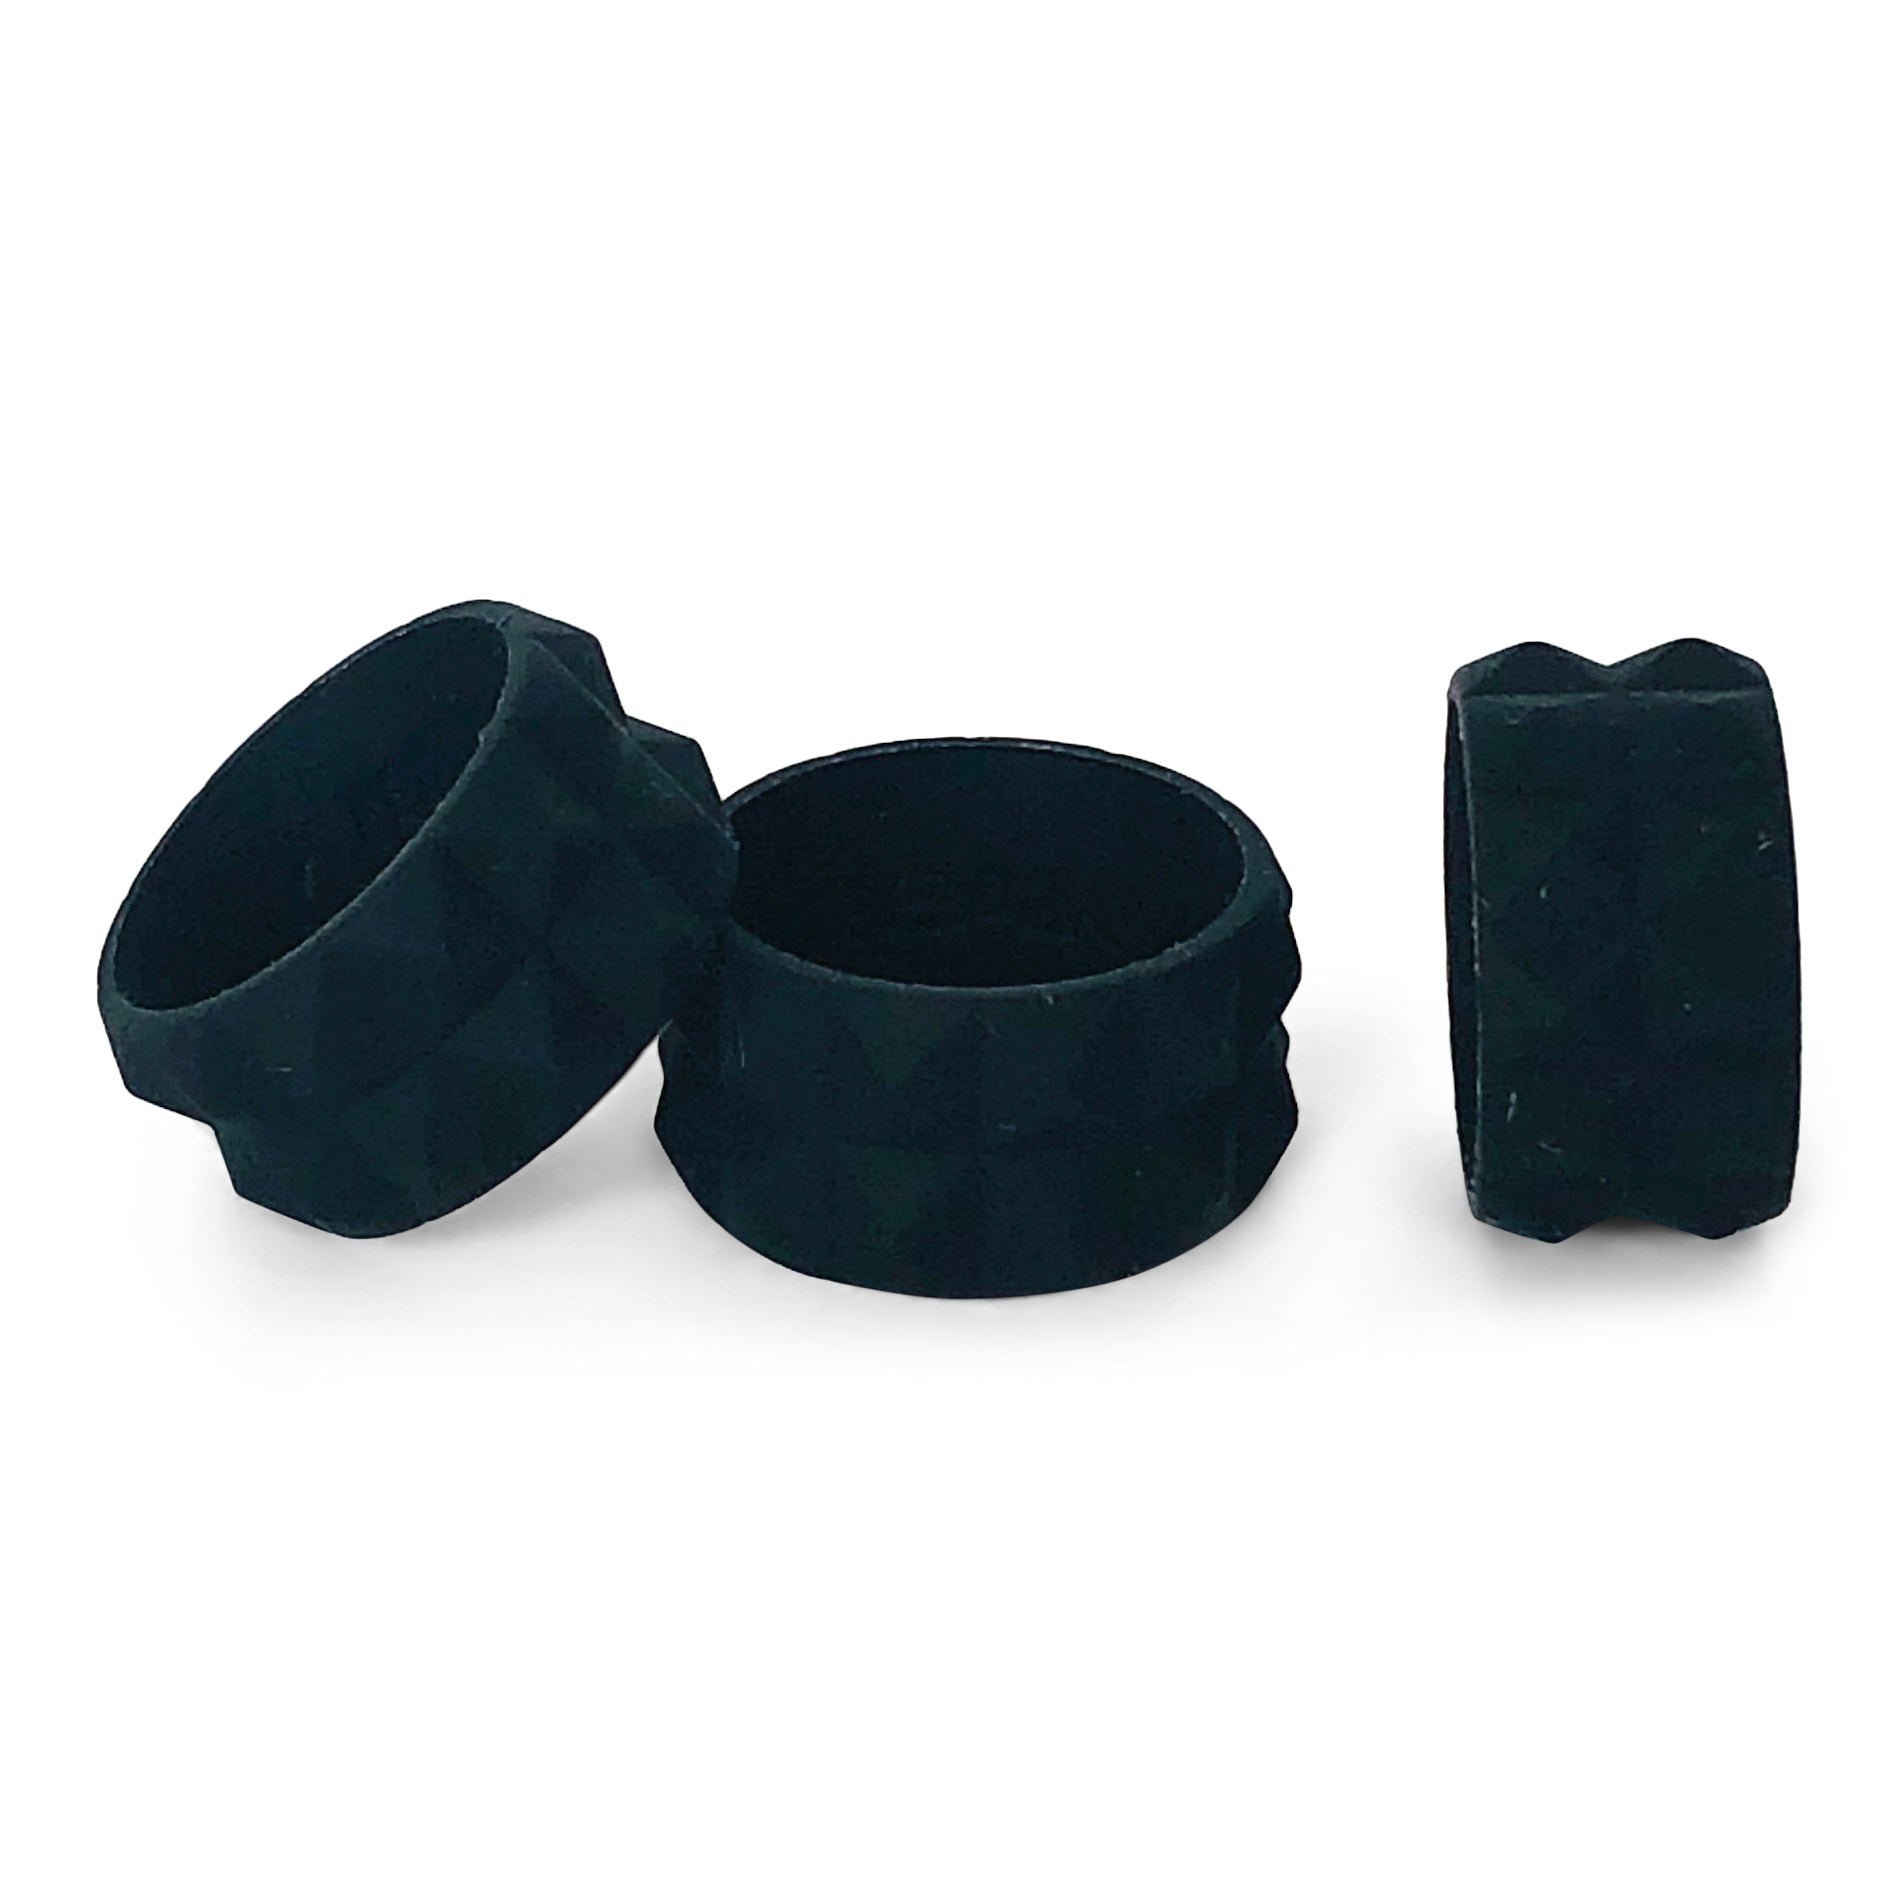 Weider Silicone Active Lifestyle Rings for Women, Xs/s, Adult Unisex, Size: 0.5 lbs, Black